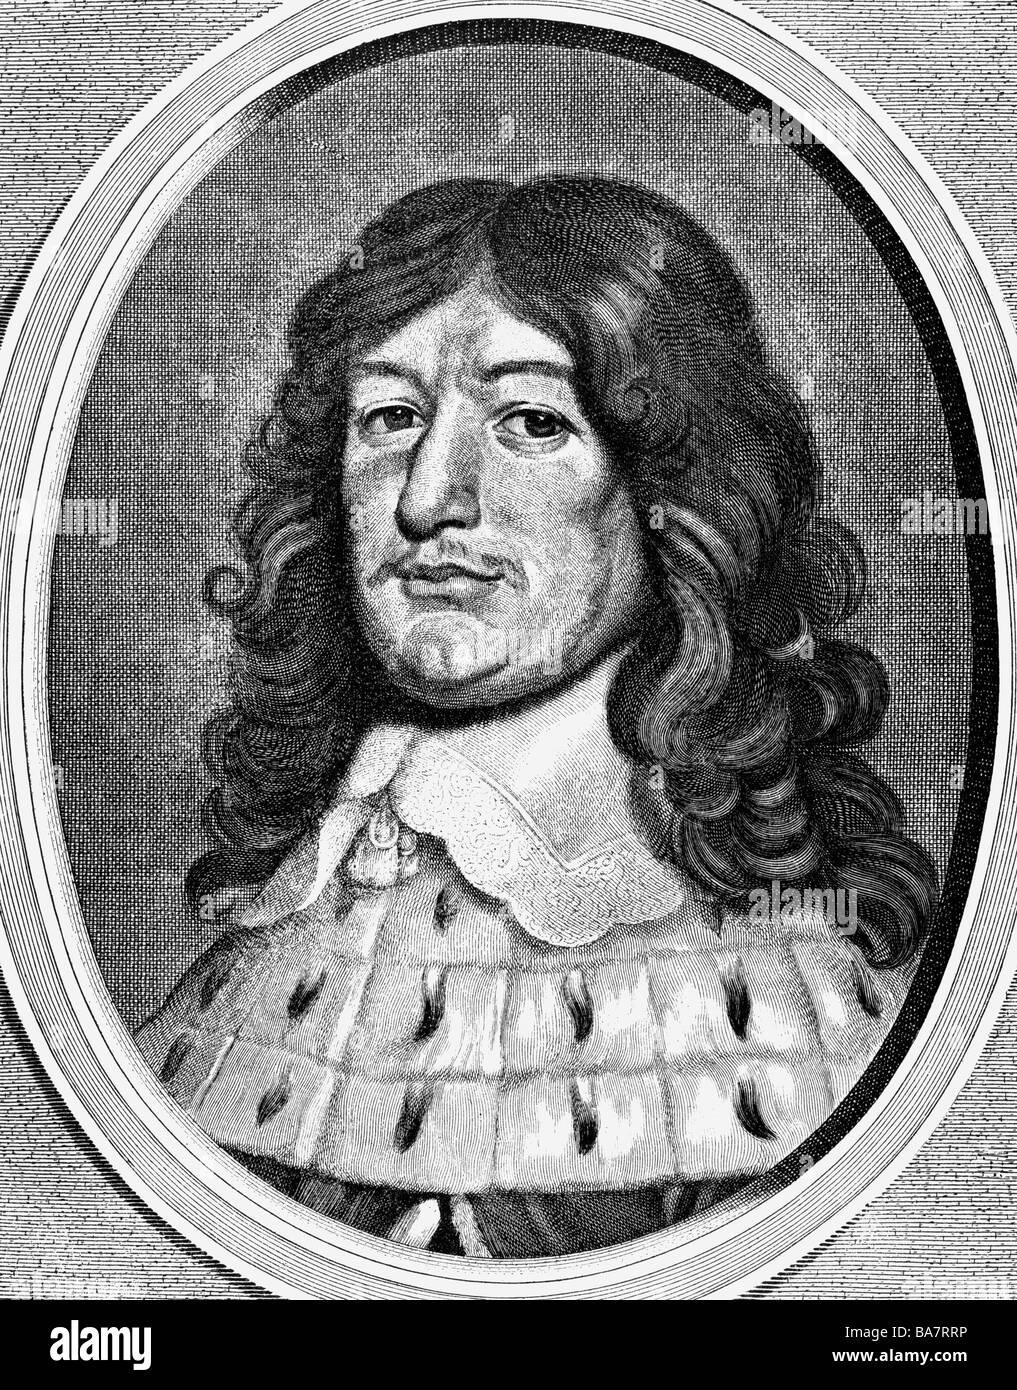 Frederick William, 16.2.1620 - 9.7.1688, 'Great Elector' of Brandenburg 1.12.1640 - 9.5.1688, portrait, copper engraving by Cornelius Fischer, 17th century, , Artist's Copyright has not to be cleared Stock Photo